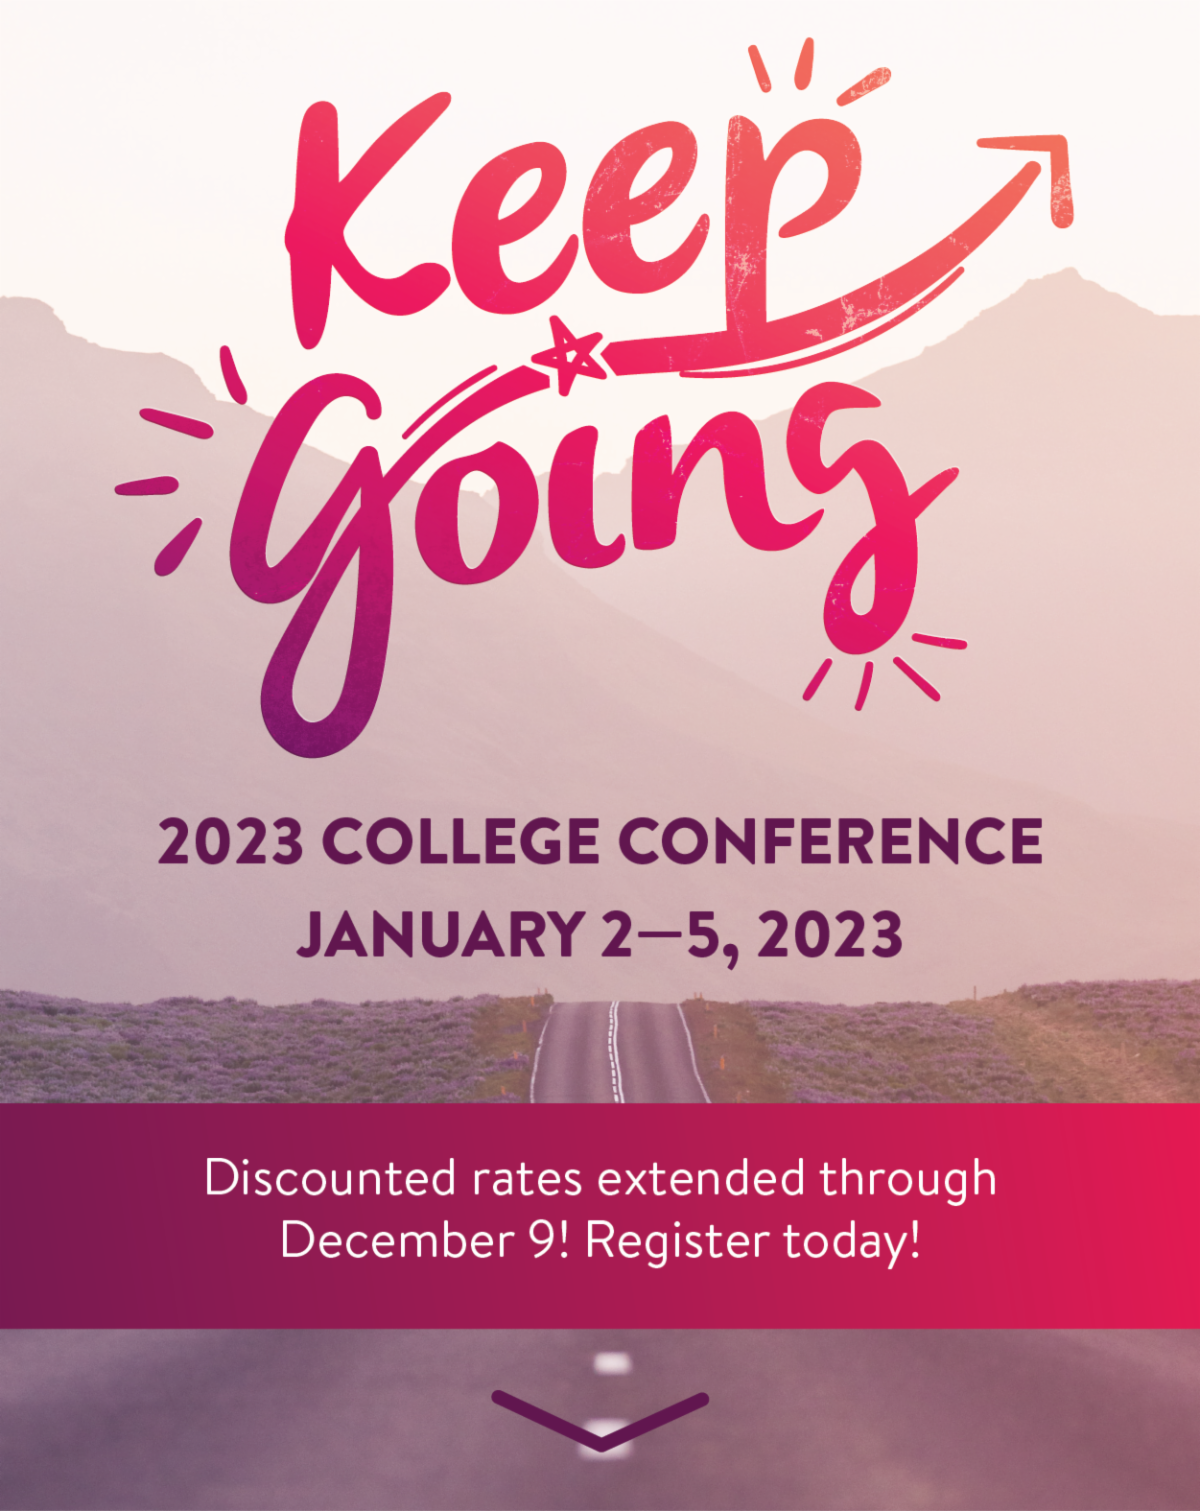 "Keep Going" 2023 College Conference @ Montreat, January 2–5, 2023. Discounted rates extended through December 9! Register today!